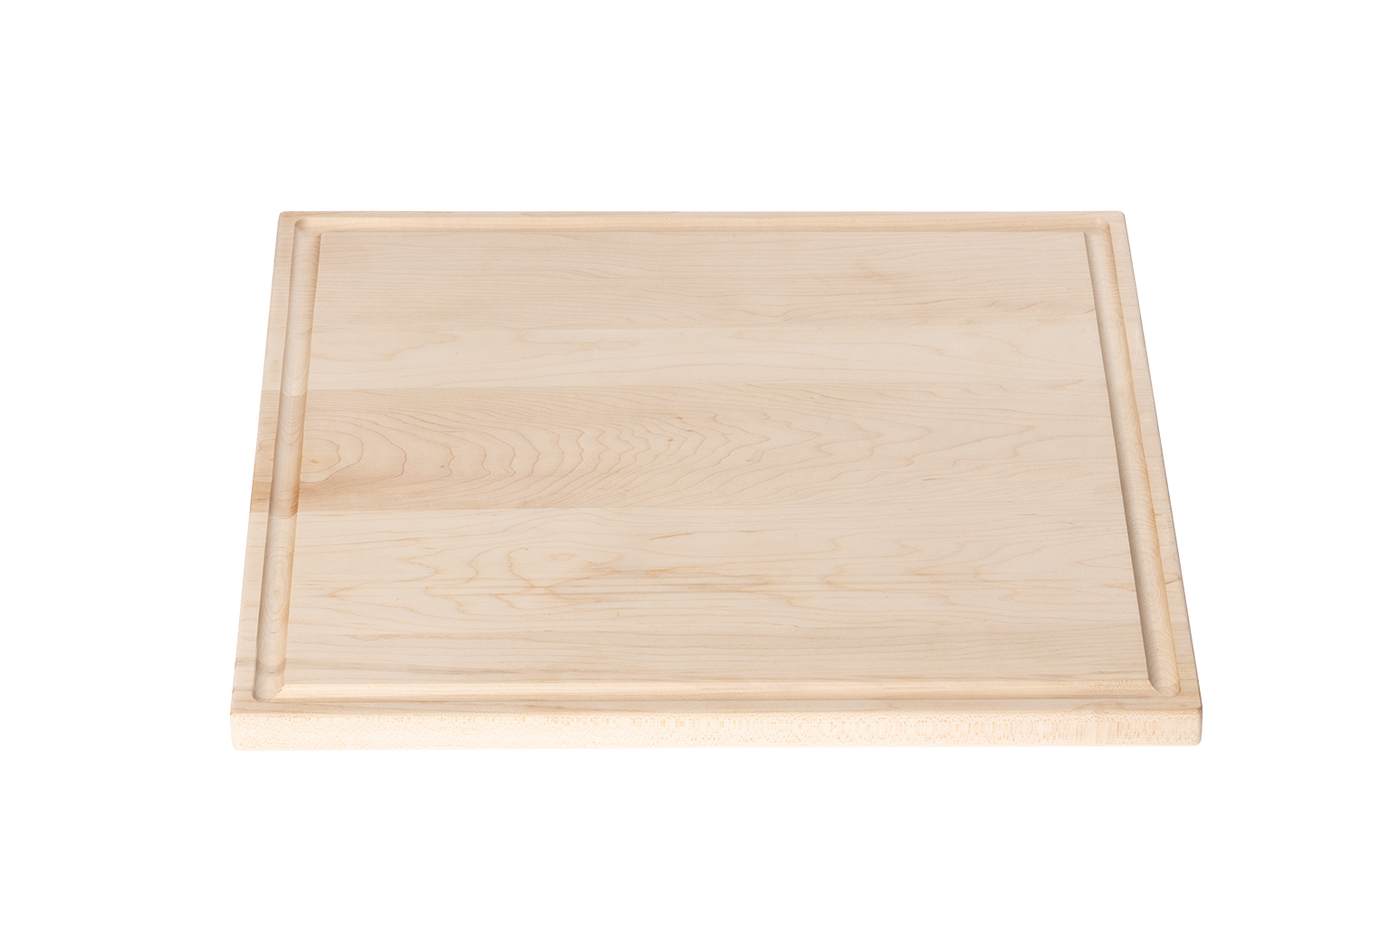 Maple - MSQG14 - Square Maple Cutting Board with Juice Groove 14-1/4''x14-1/4''x3/4''